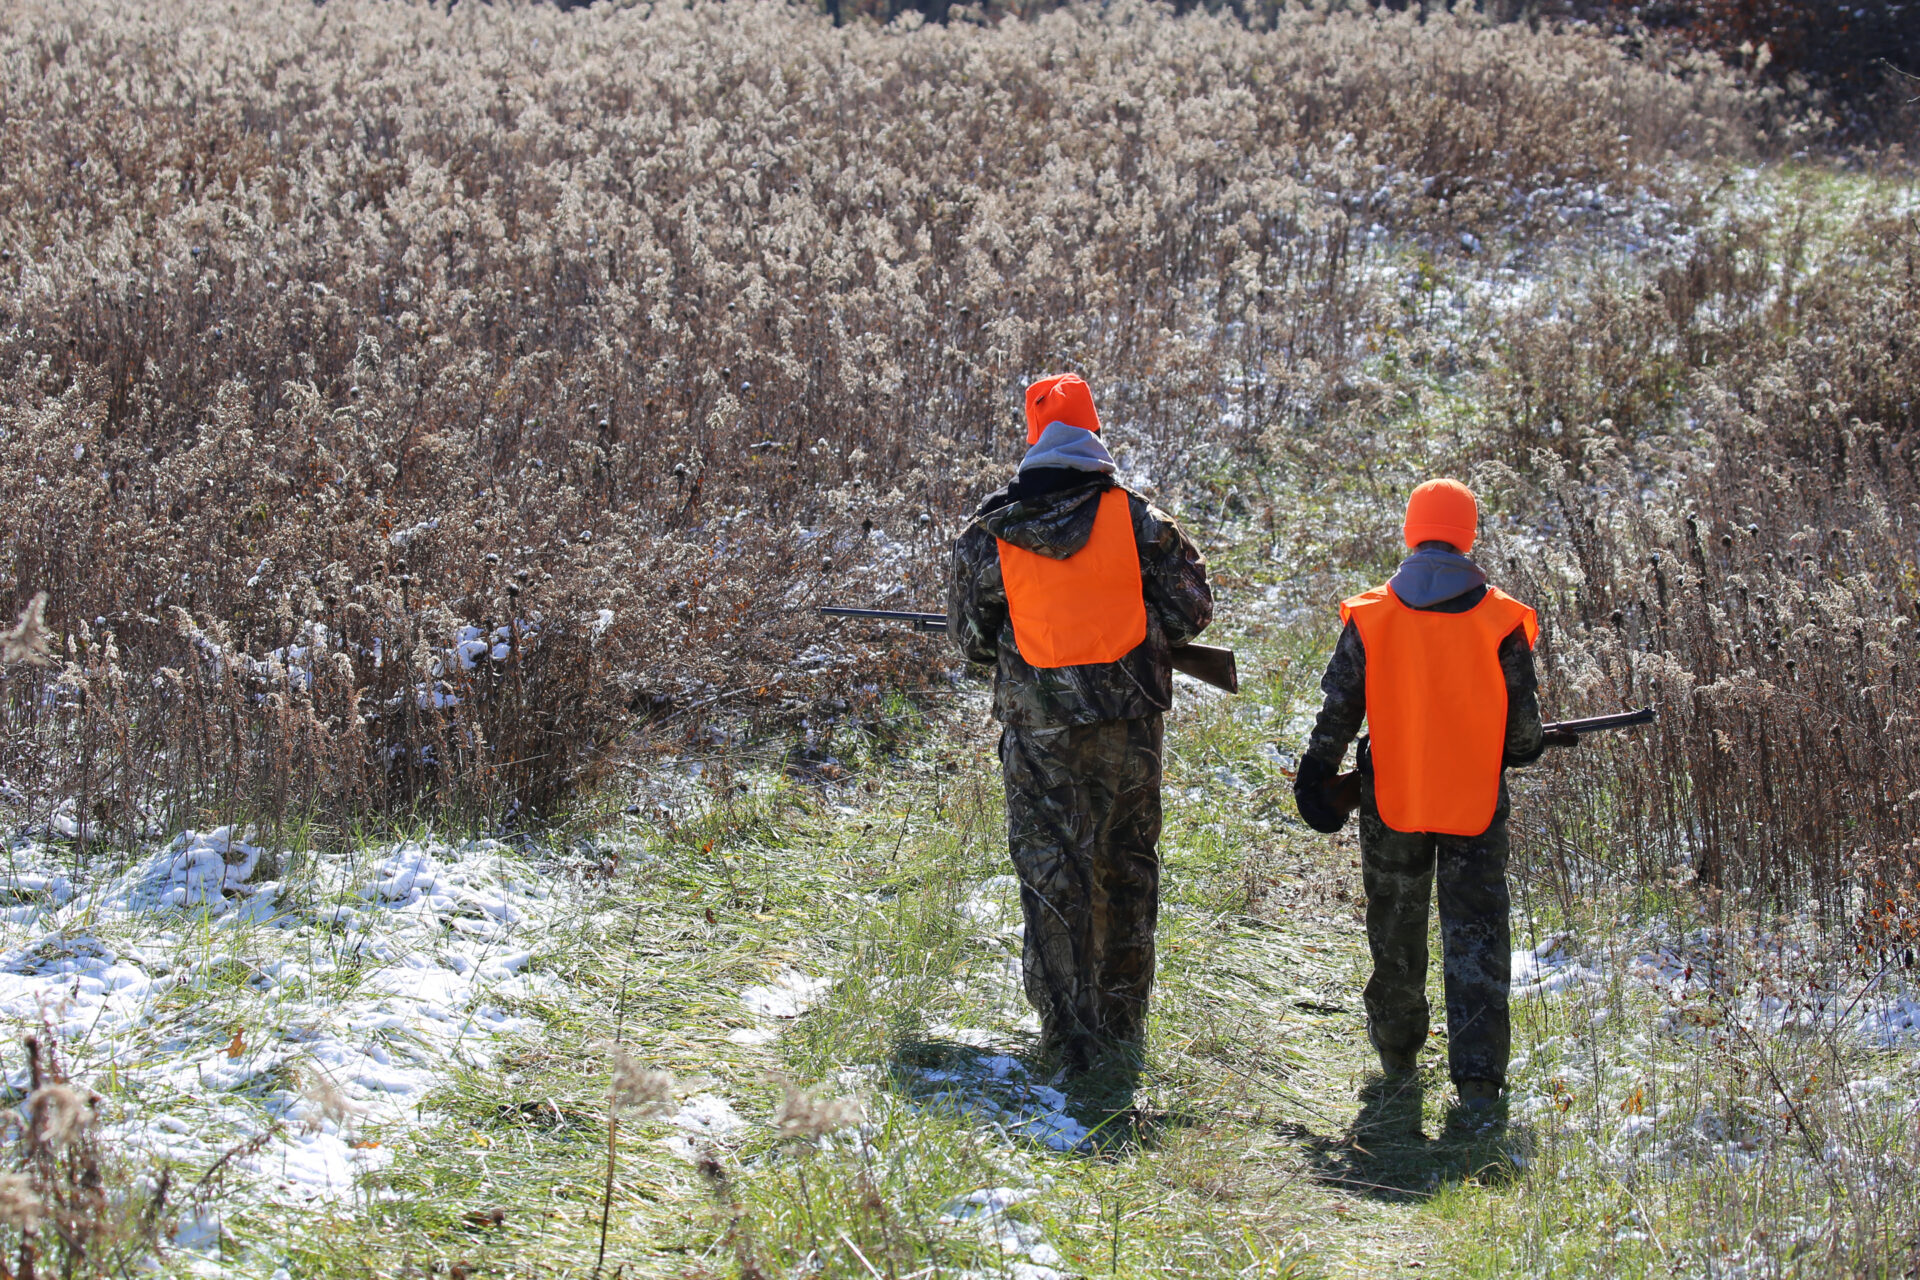 Safety Tips for Camping During Hunting Season